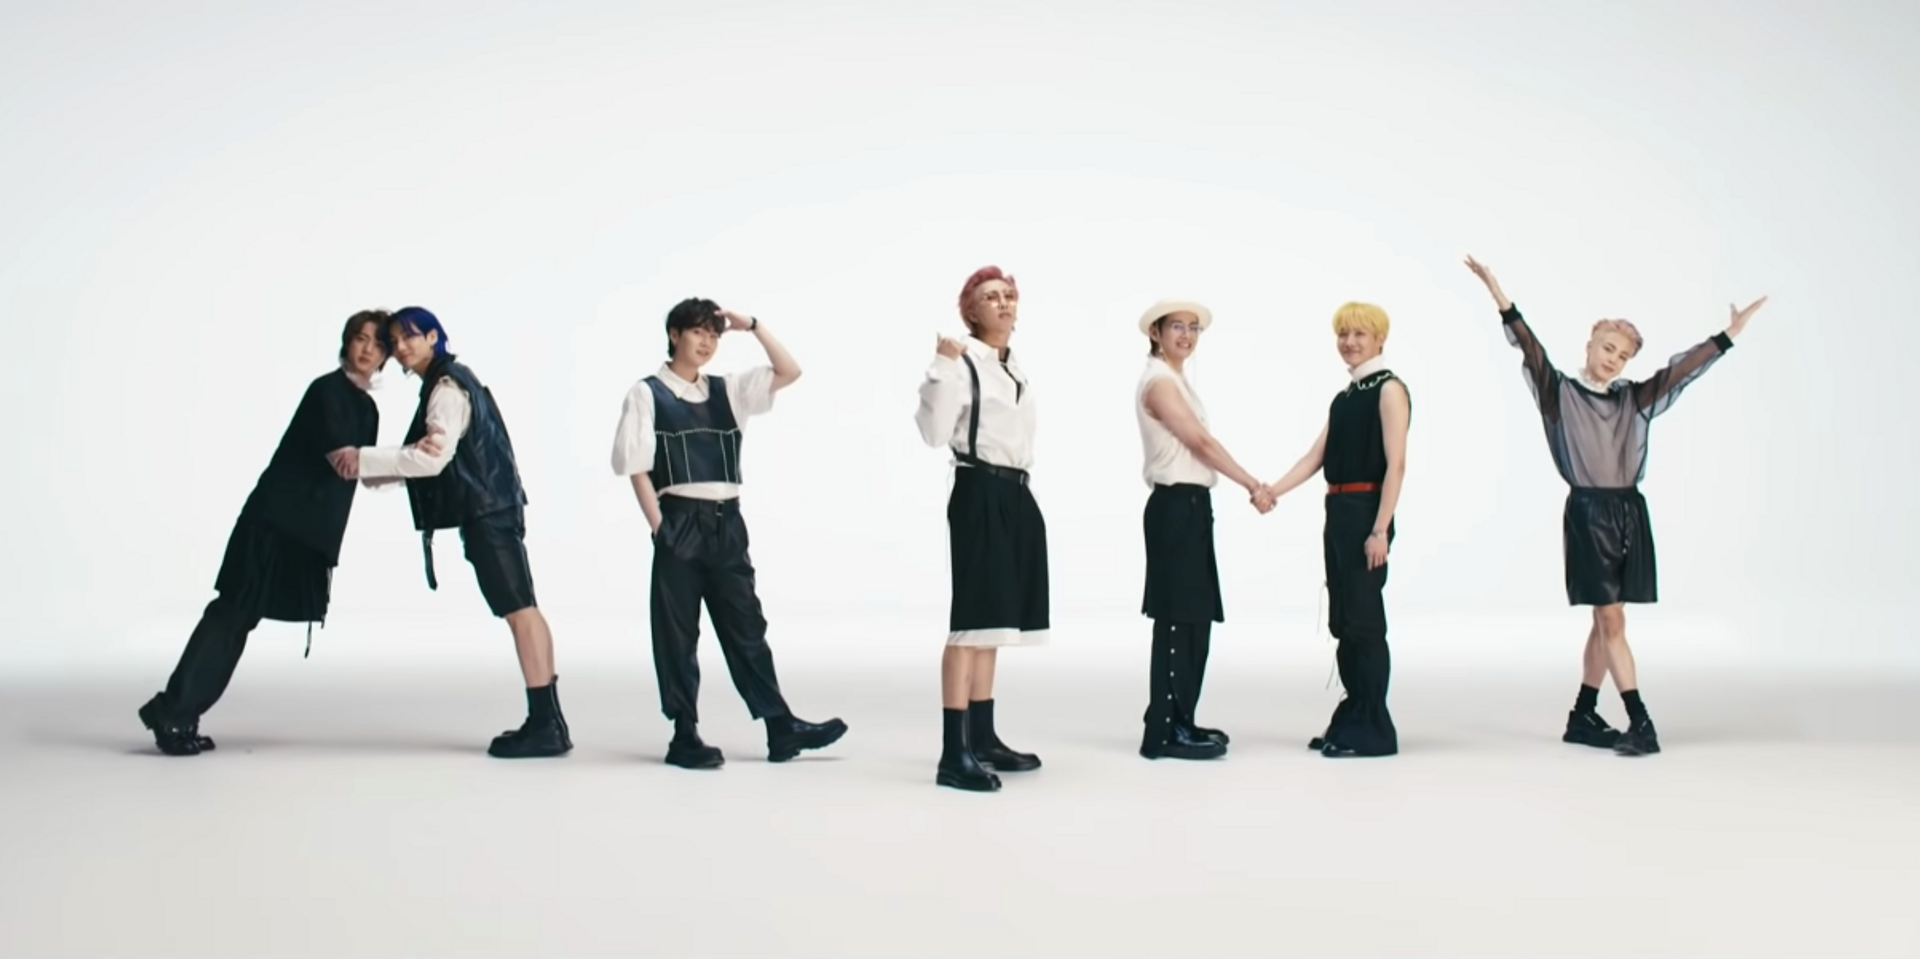 BTS' 'Butter' gets over 10 million views in less than 15 minutes,